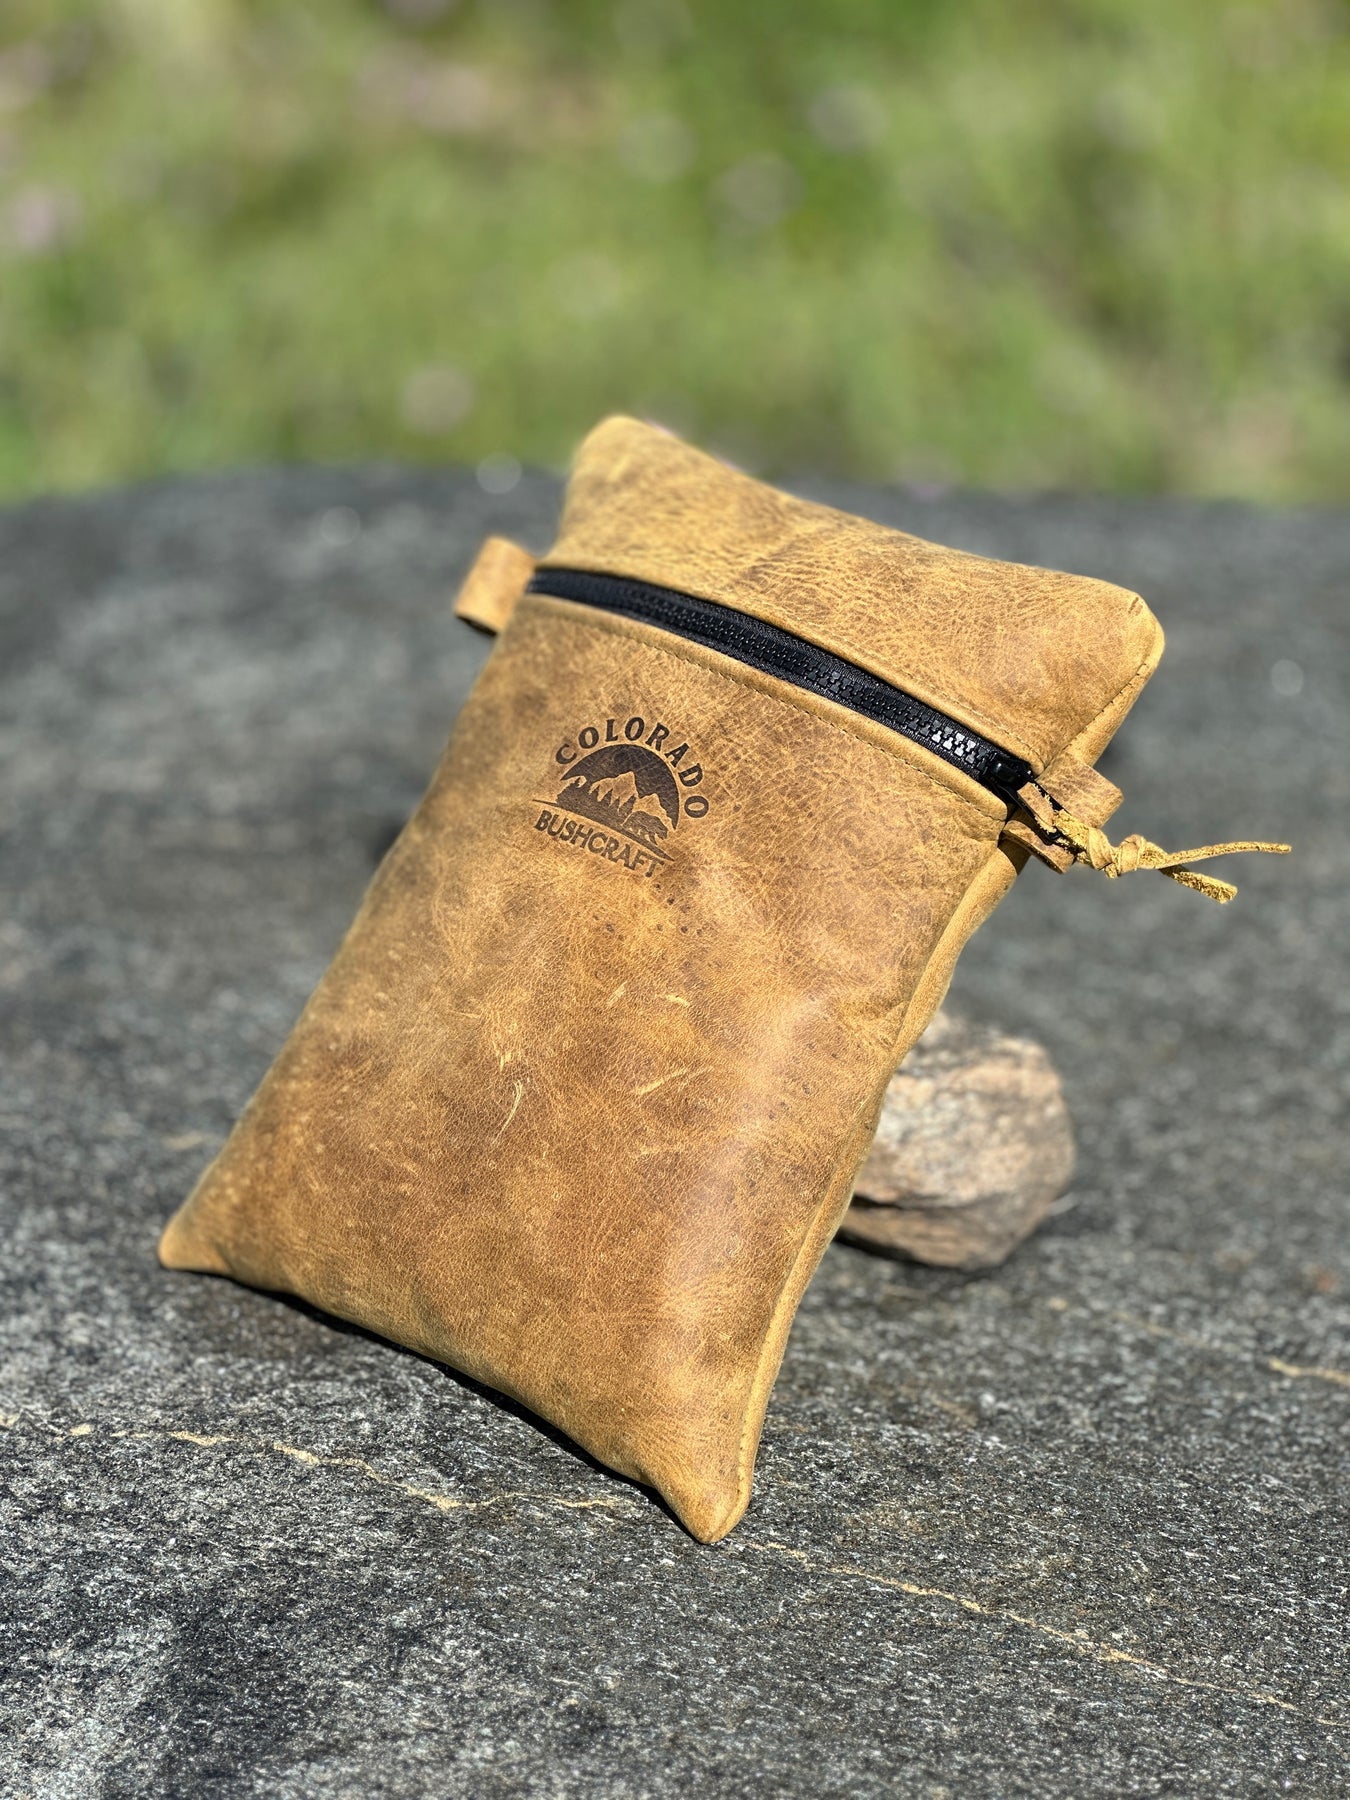 Kodiak Leather Traditional Medium EDC Pouch Bushcraft Survival Camping  Possibles Dopp Grooming